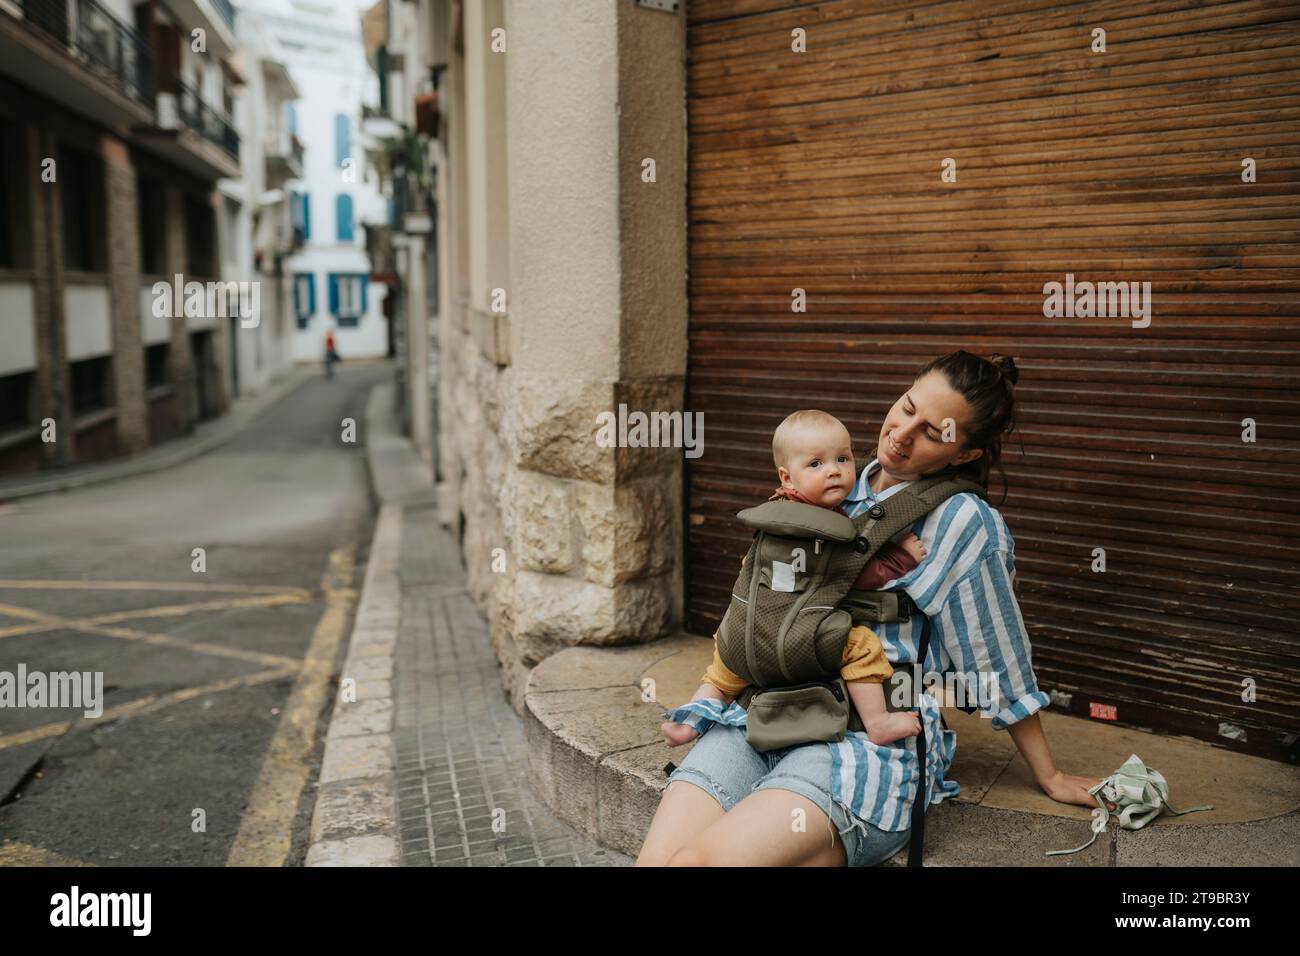 Mother with baby sitting on street Stock Photo